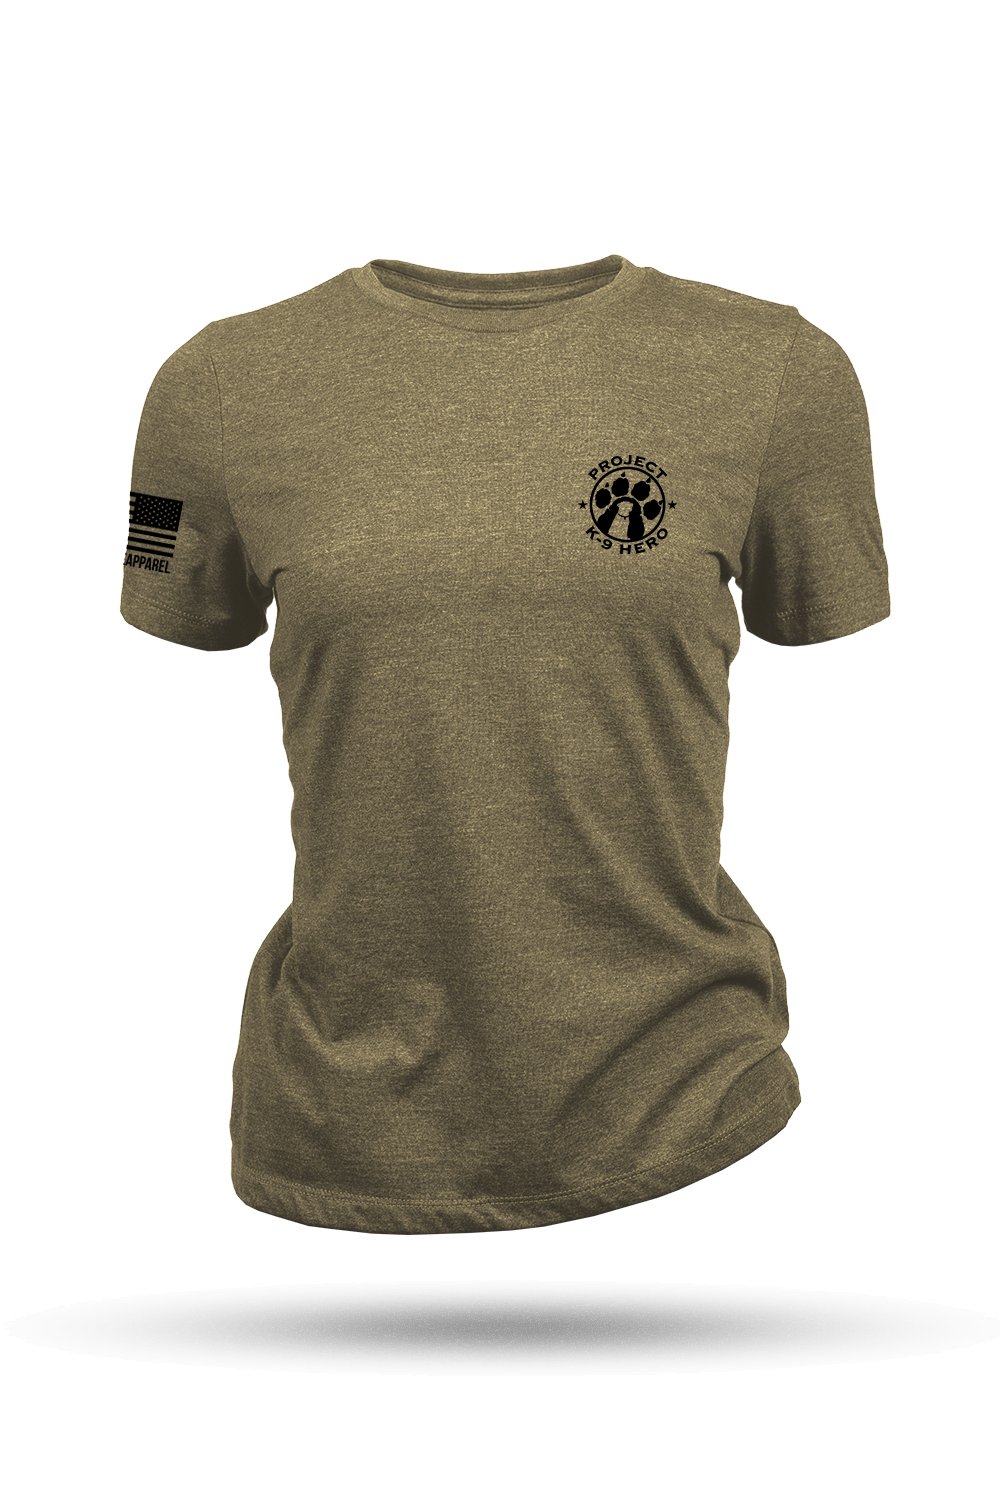 Women's T - Shirt - Project K - 9 Hero - Remember Every Dog Deployed